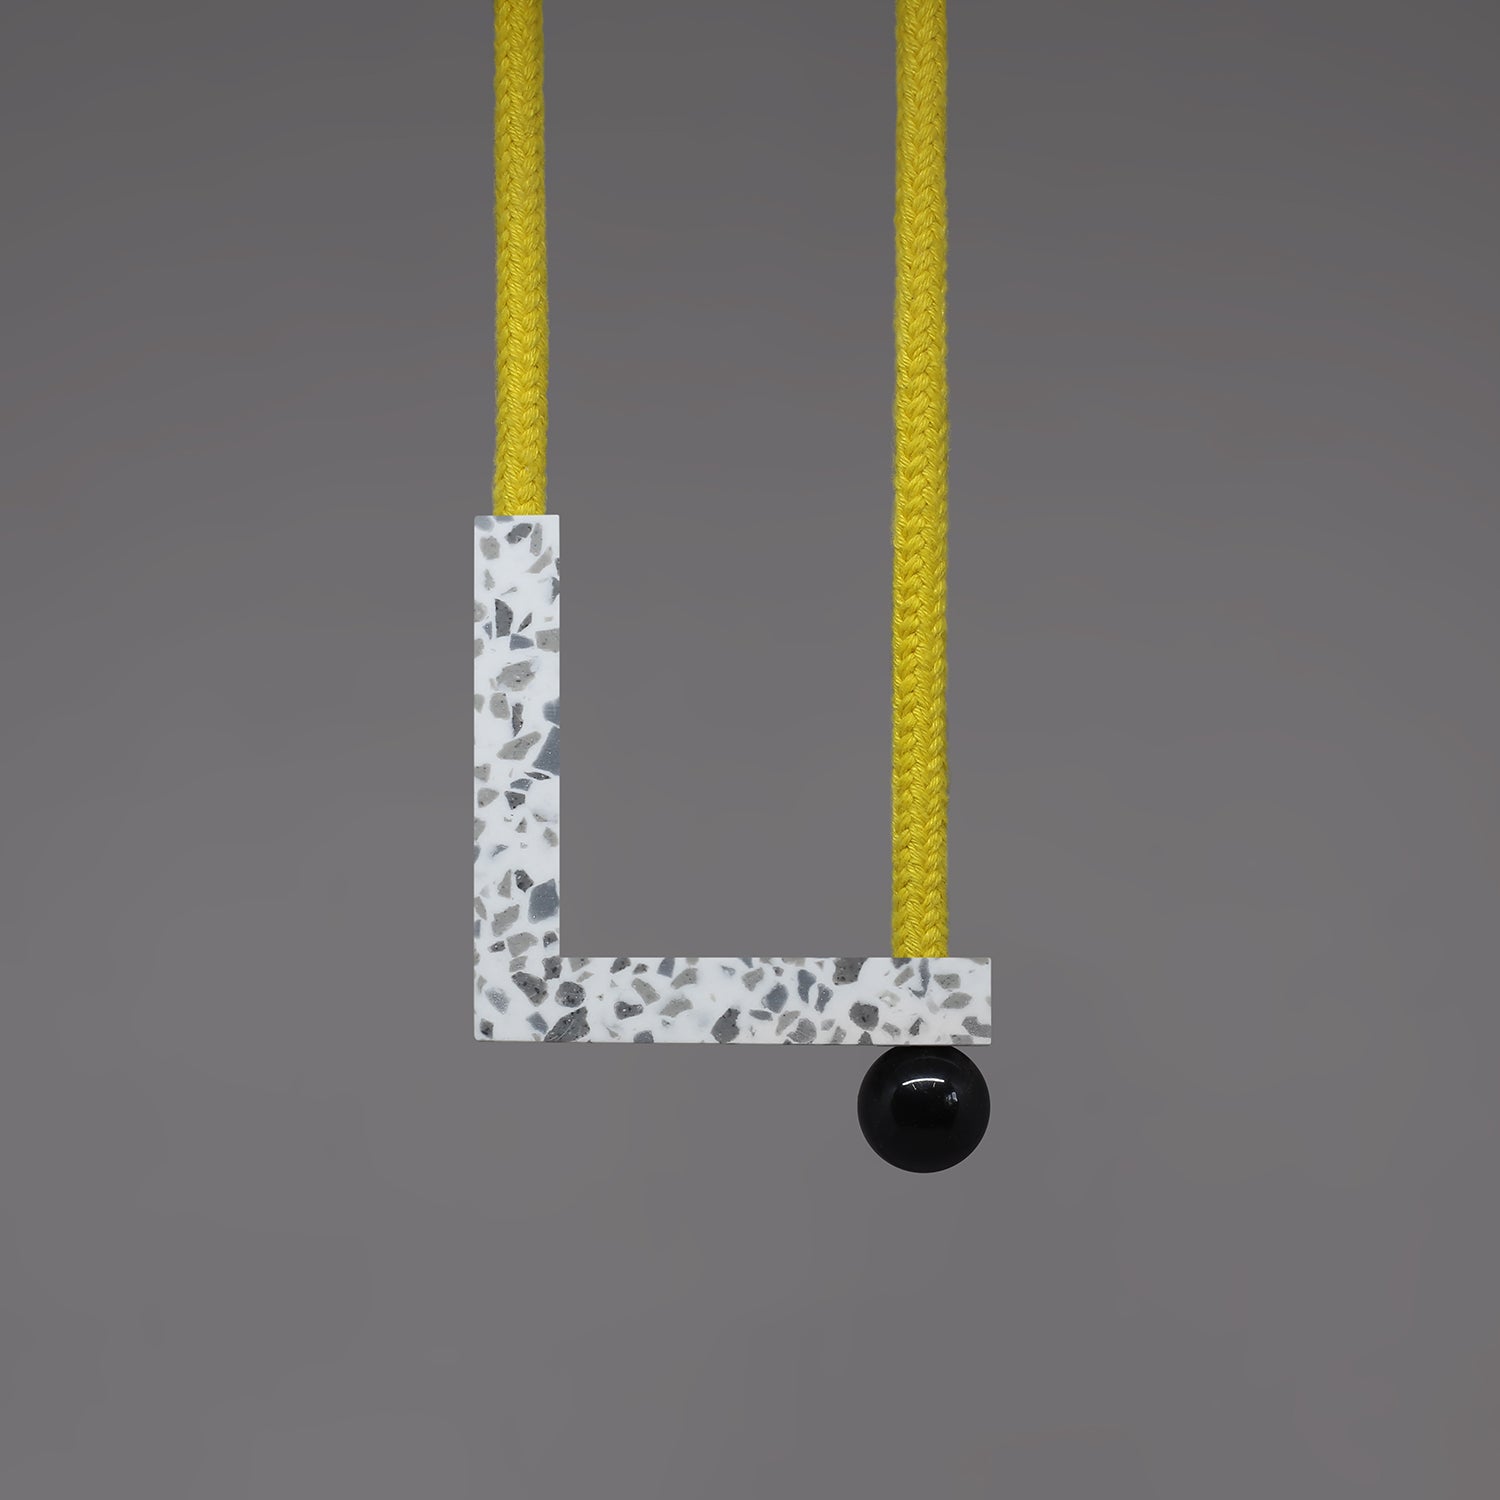 Lo necklace (yellow rope)